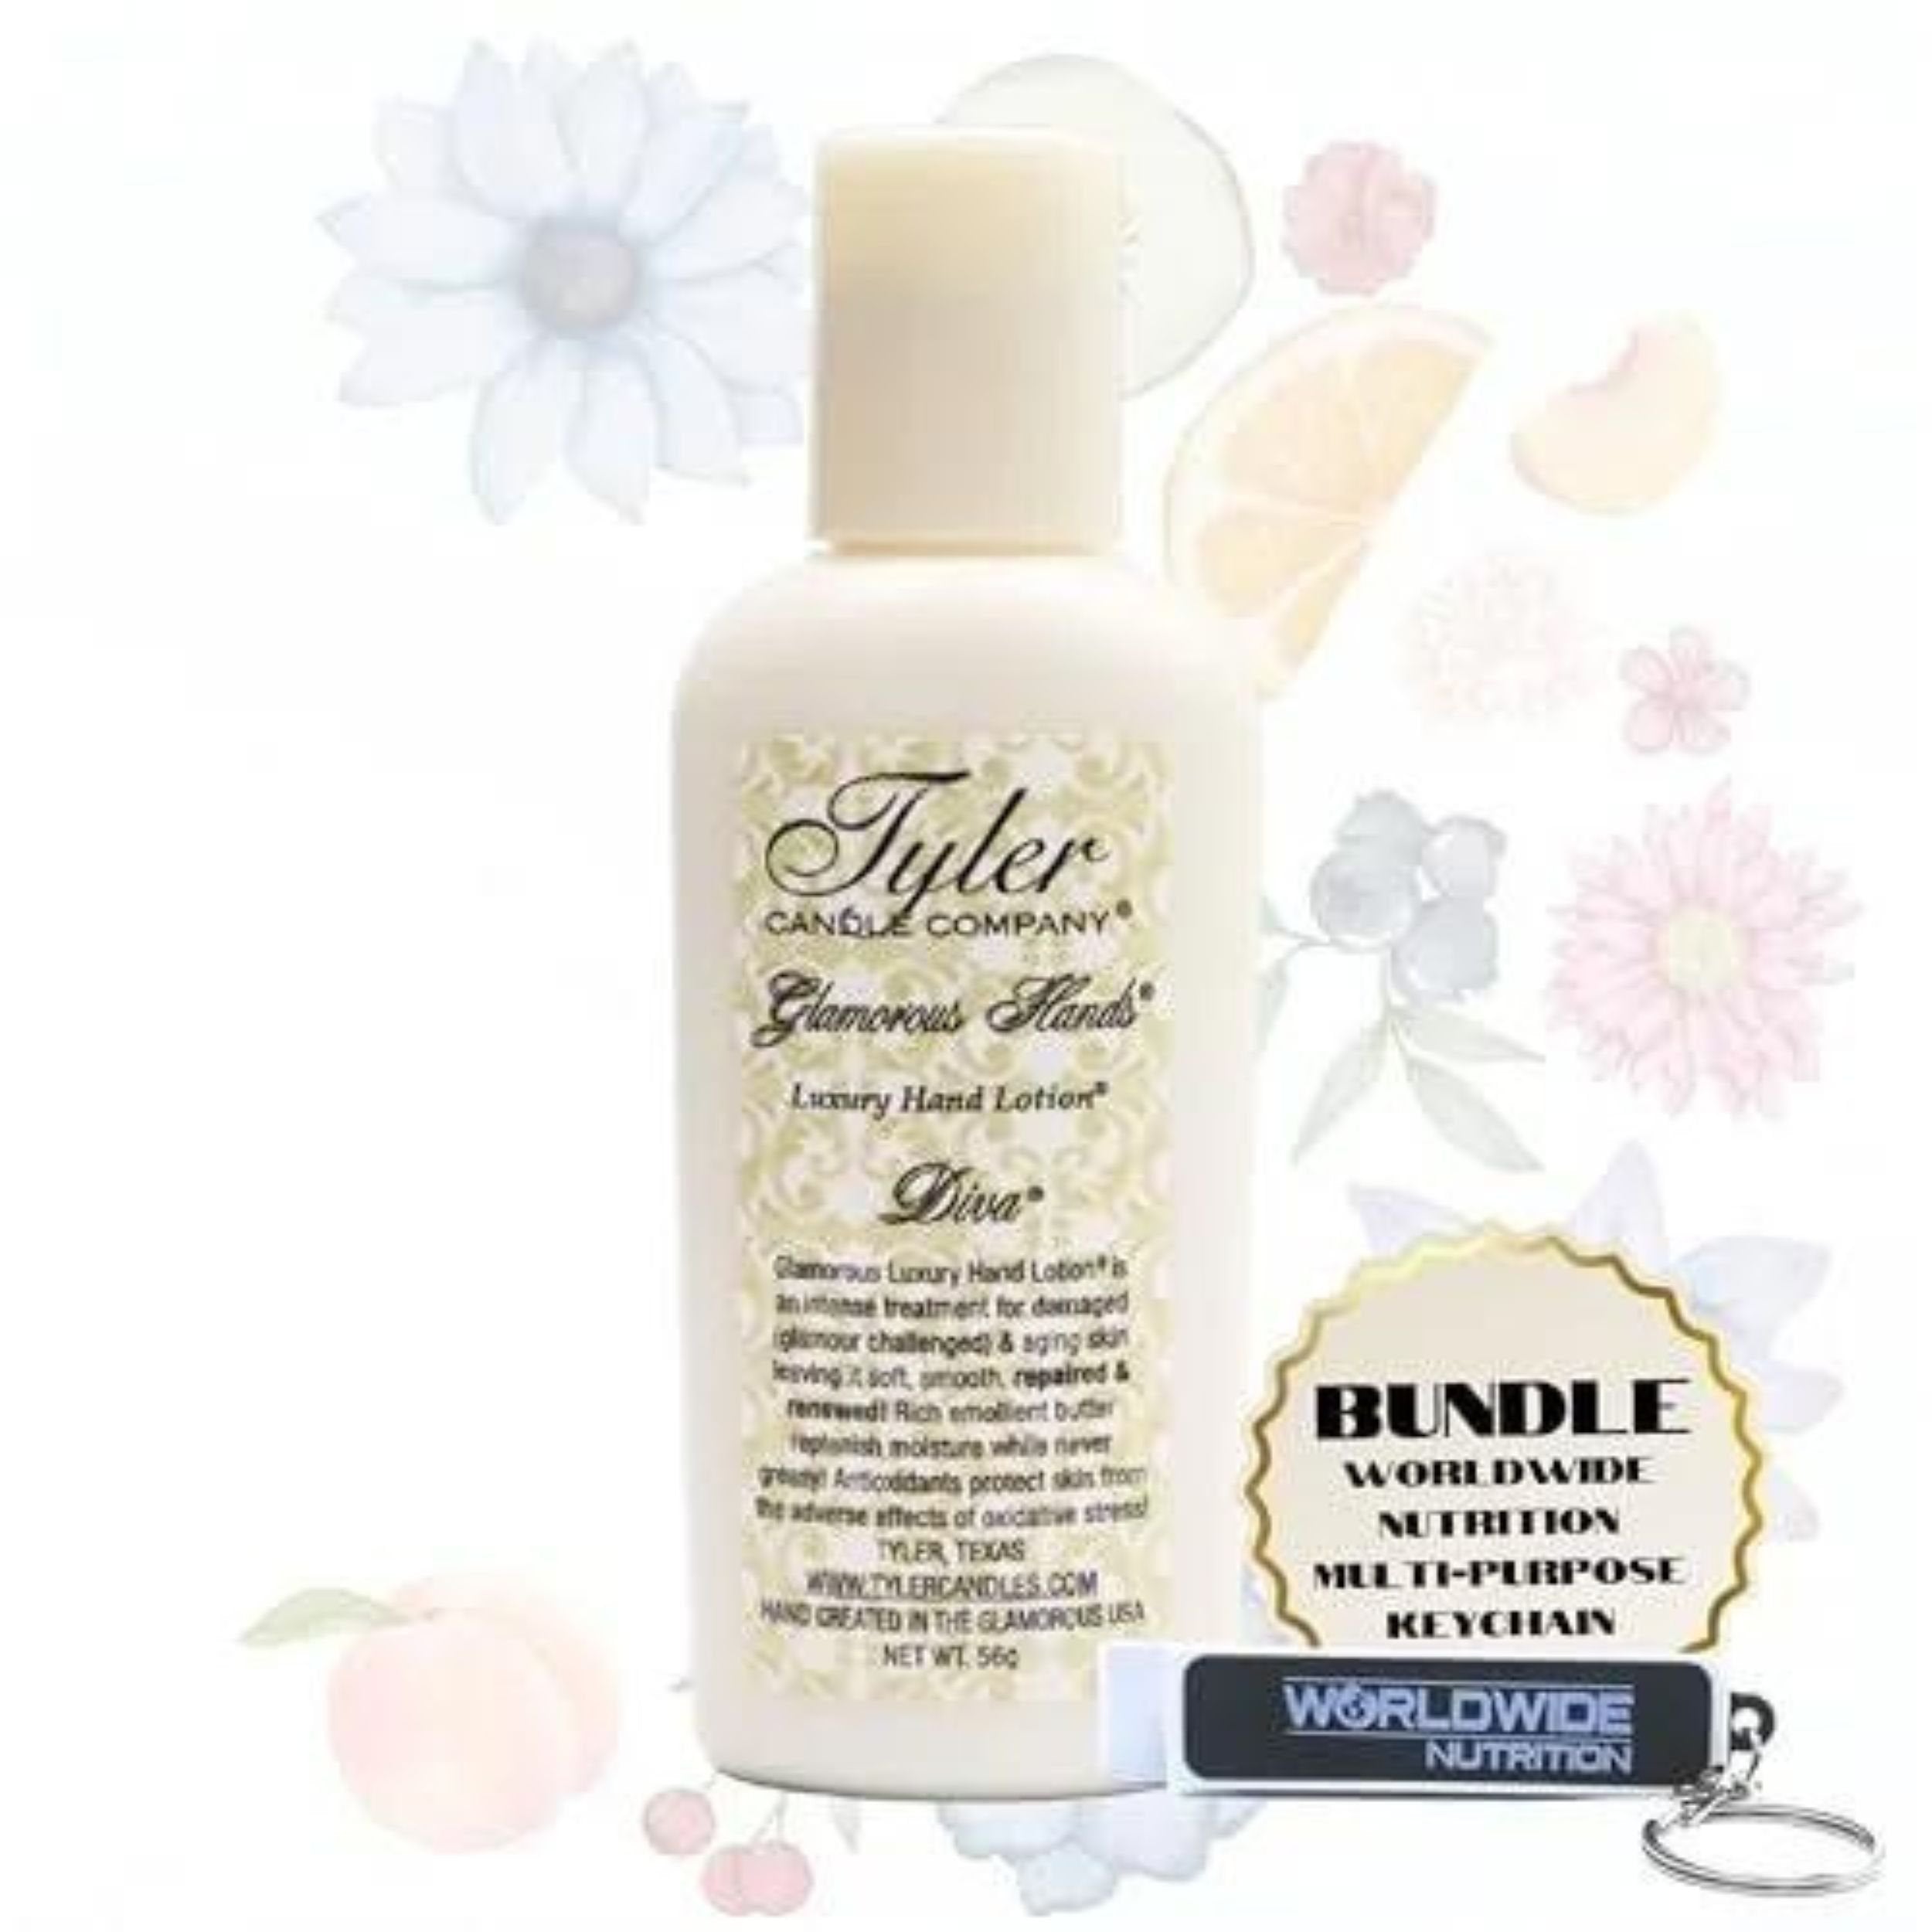 Tyler Diva Hand Lotion - Scented and Small Hand Lotion For Dry Hands with Moisture-Boosting Skin - 2 Oz Travel Size Luxury Hand Lotion and Multi-Purpose Key Chain